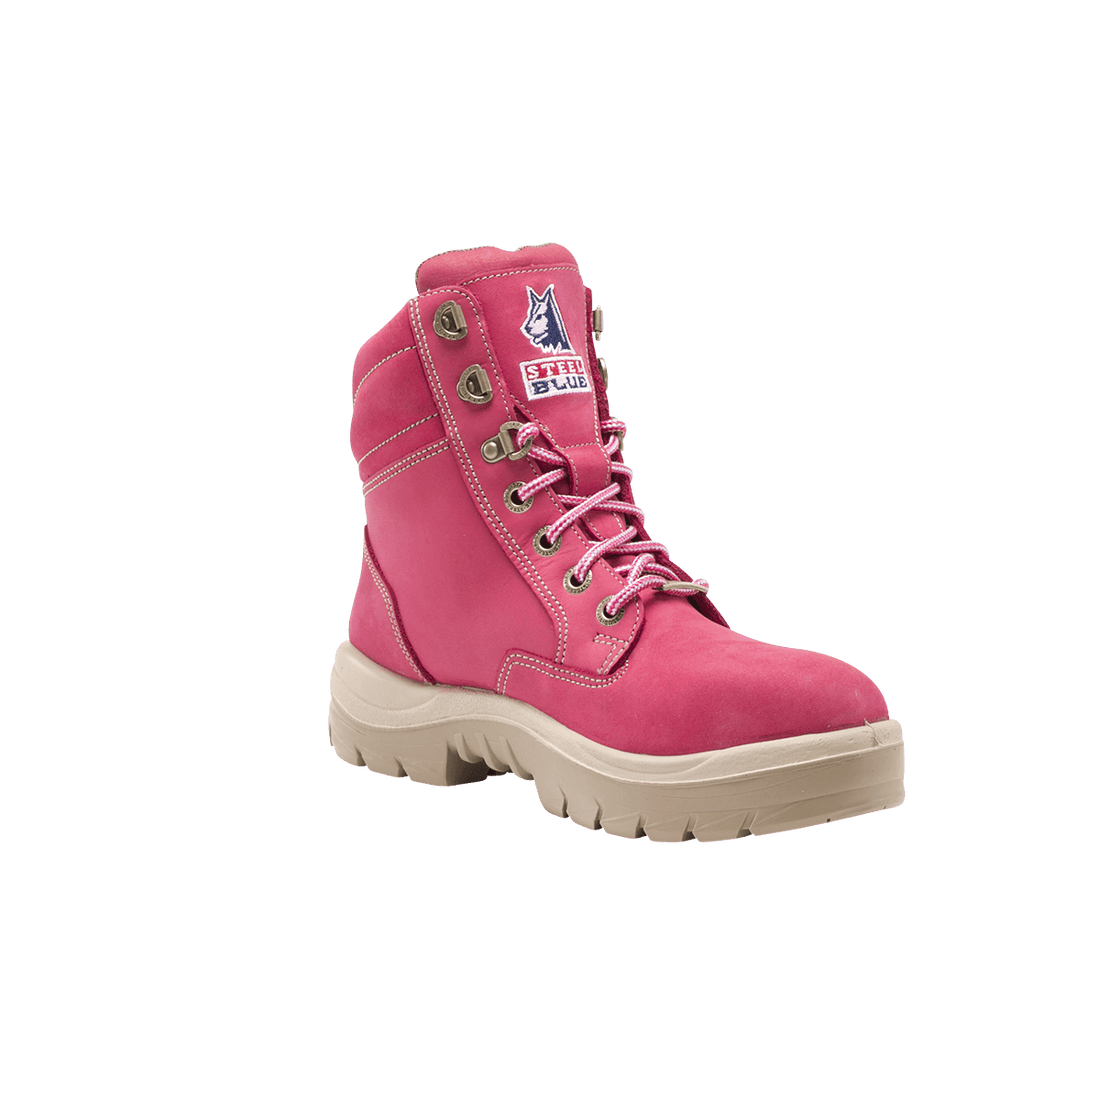 Women's Safety boots